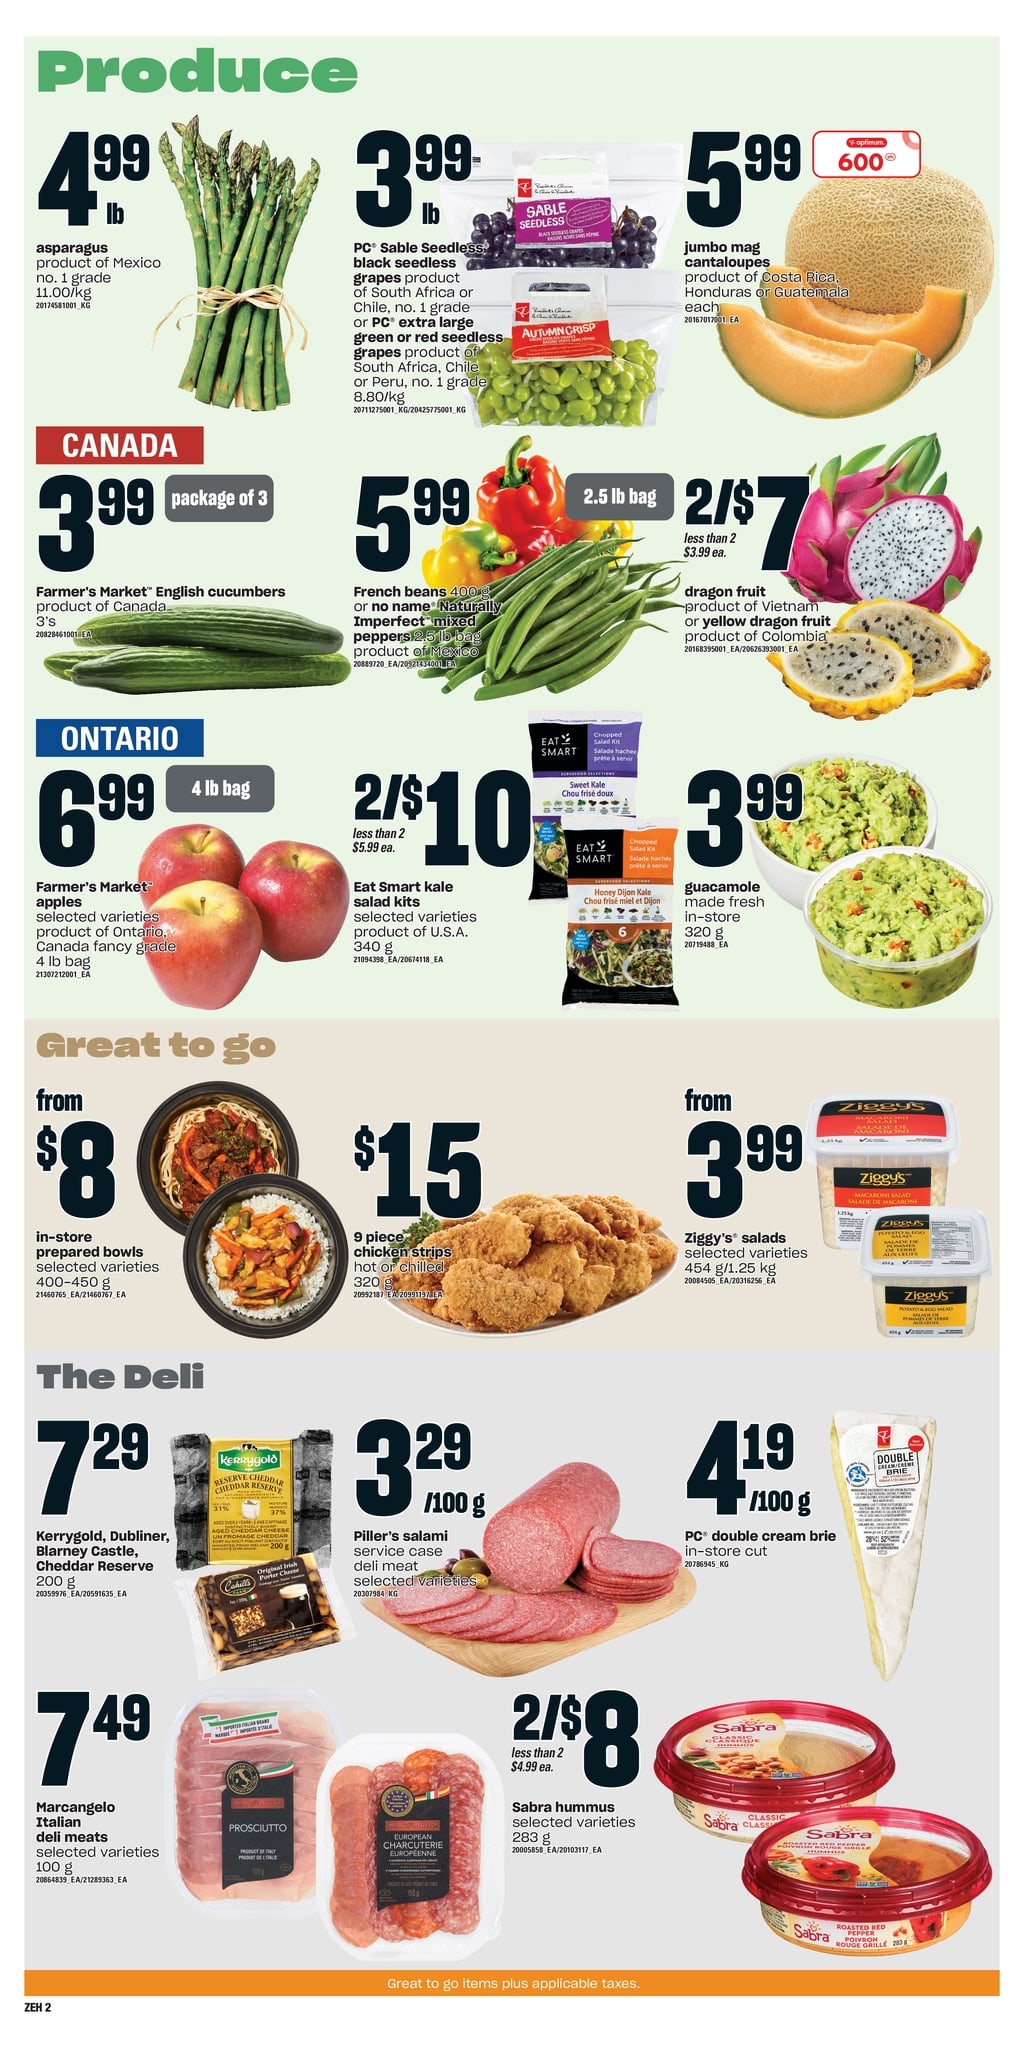 Zehrs - Weekly Flyer Specials - Page 4